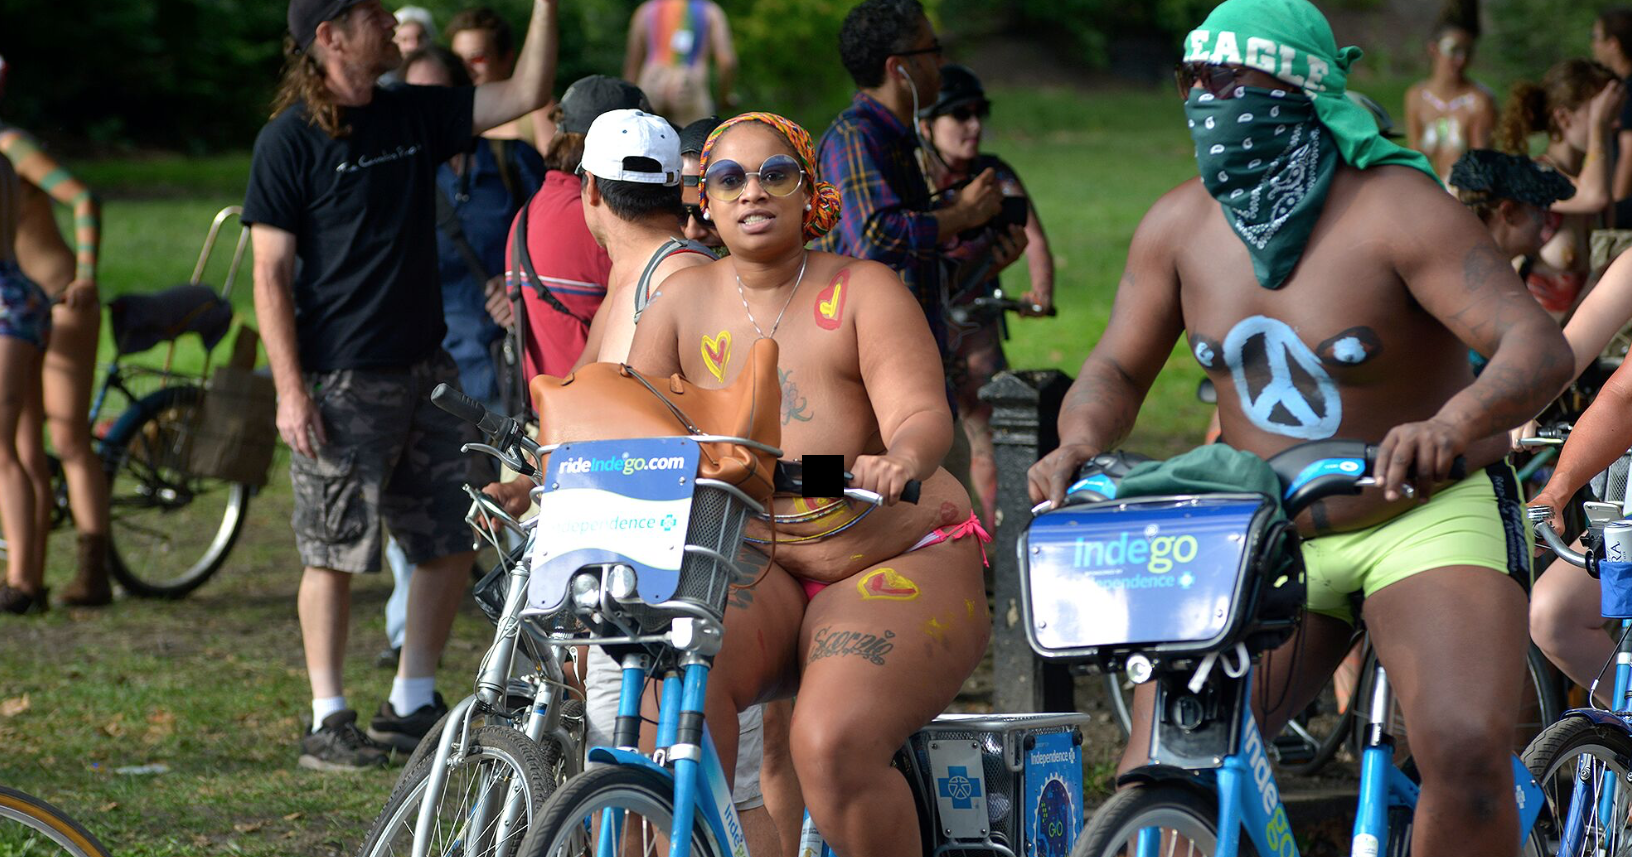 anabela cardoso recommends philly naked bike ride pics pic